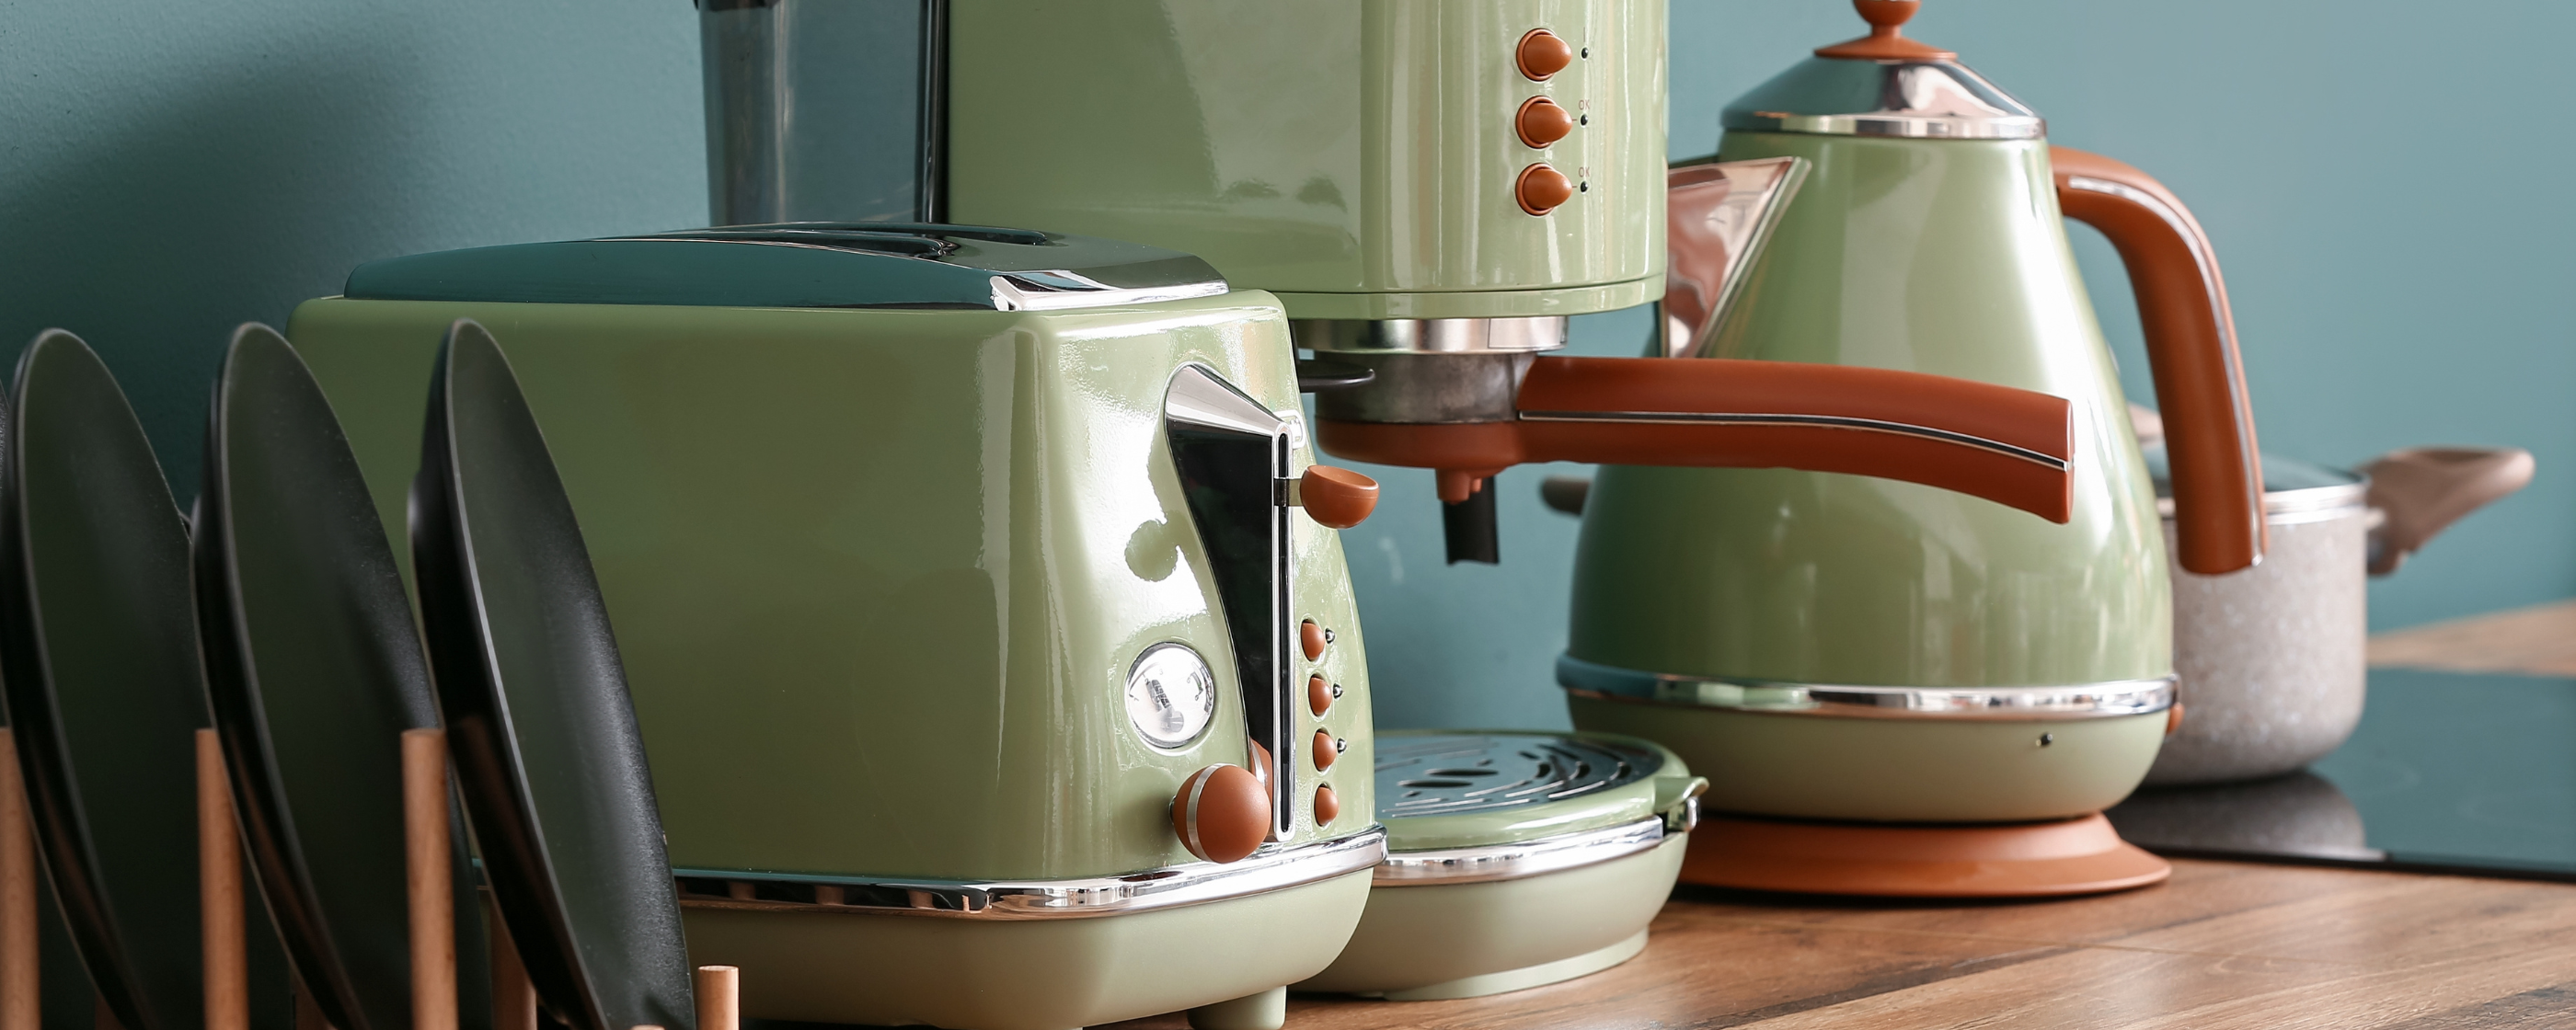 Matching kitchen home appliances on a countertop.